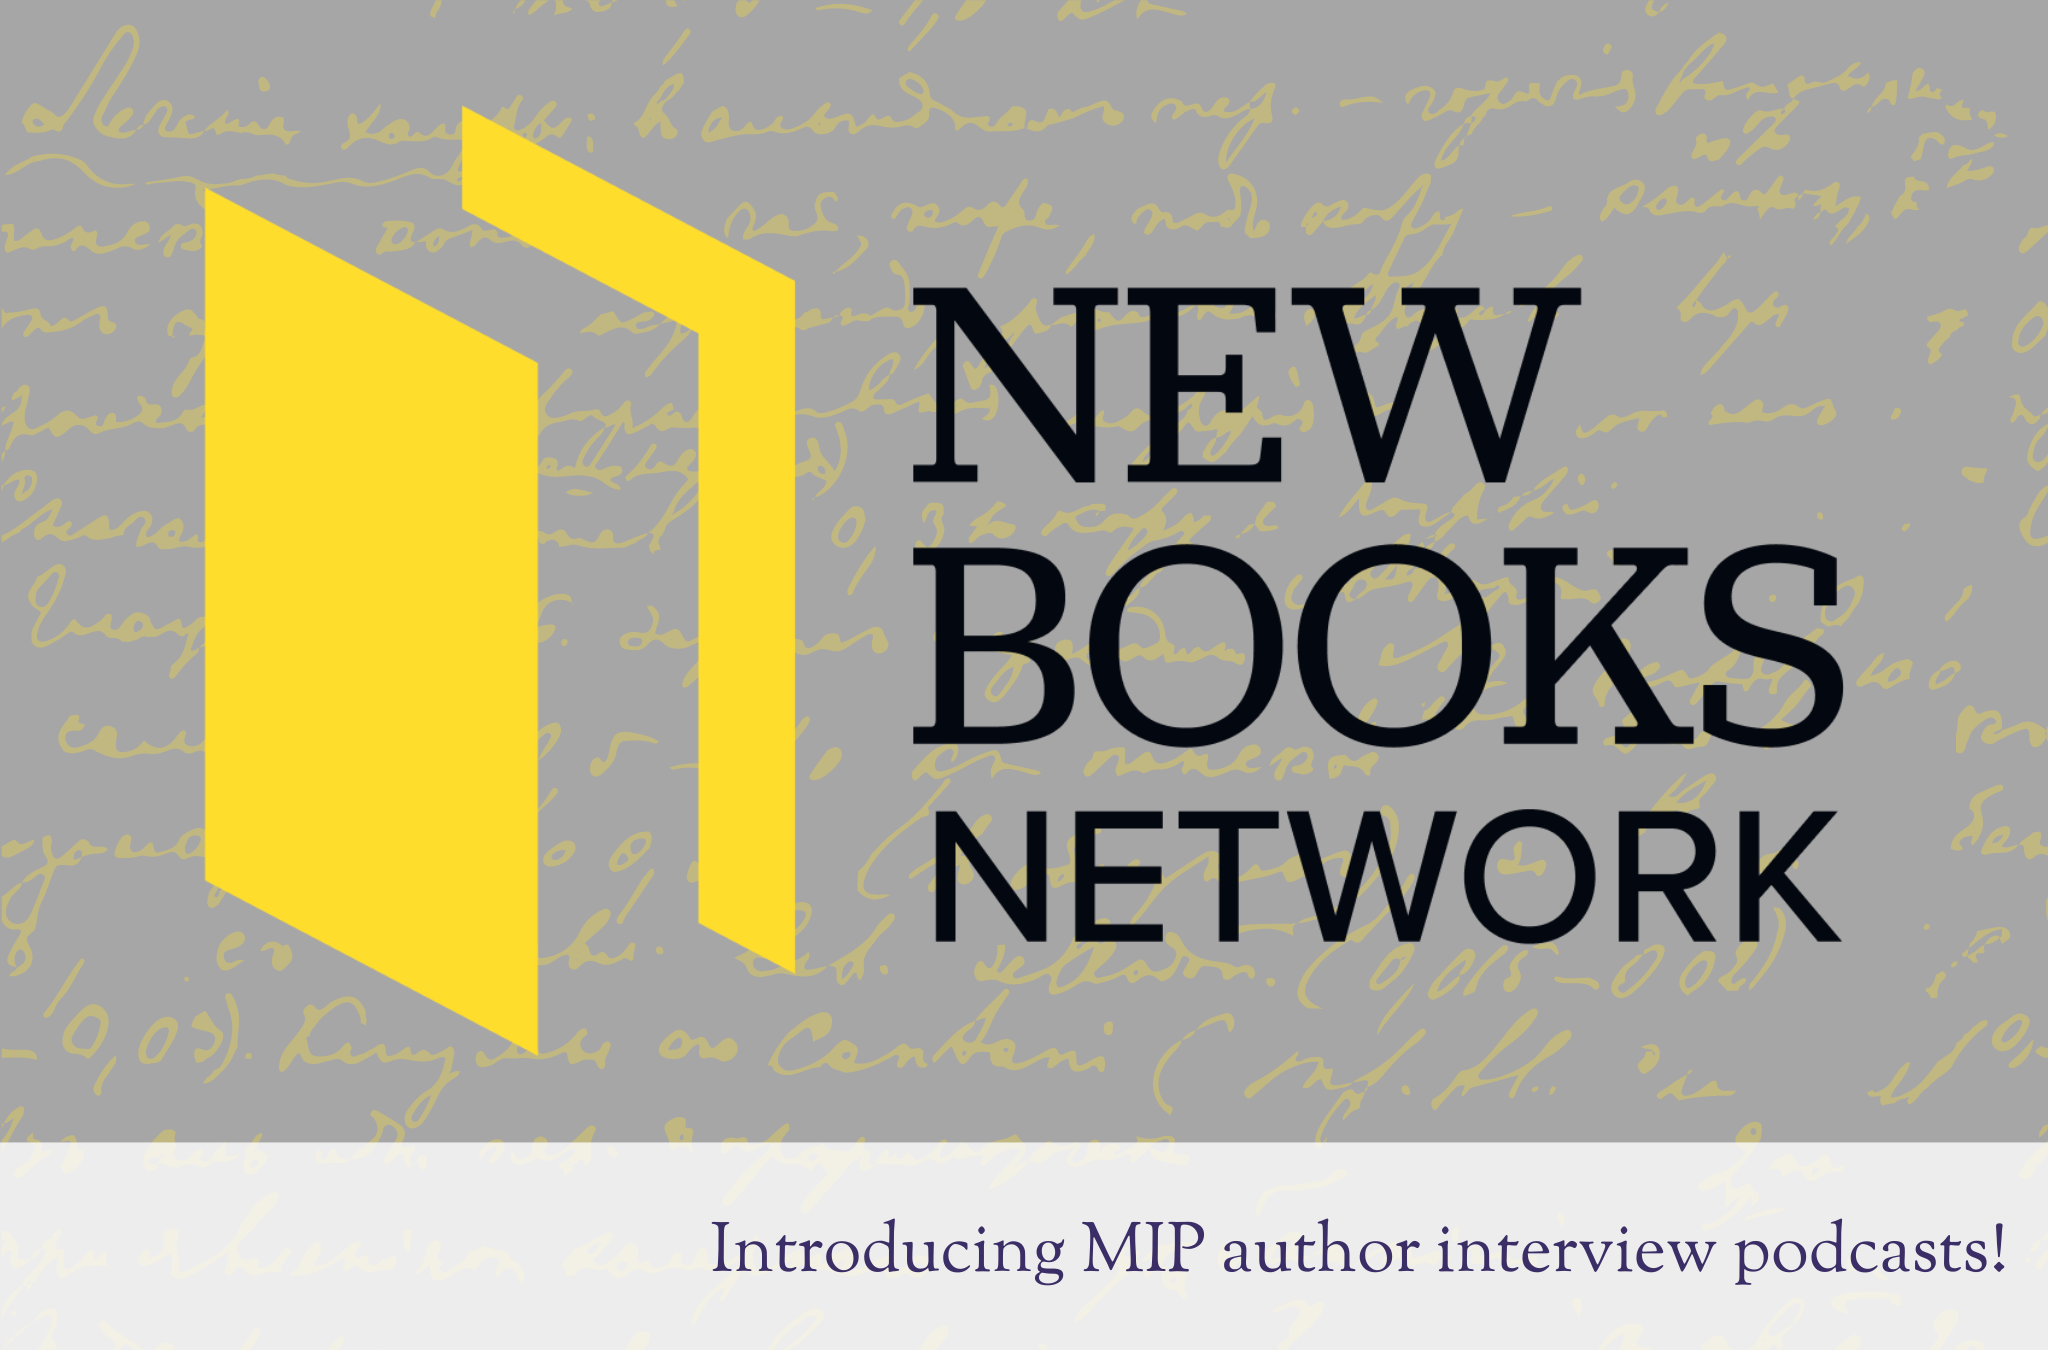 The logo of the New Books Network: a stylized yellow book next to the words New Books Network in black, on a grey background with slightly translucent yellow script writing. A white band at the bottom holds the words Introducing MIP author interview podcasts!